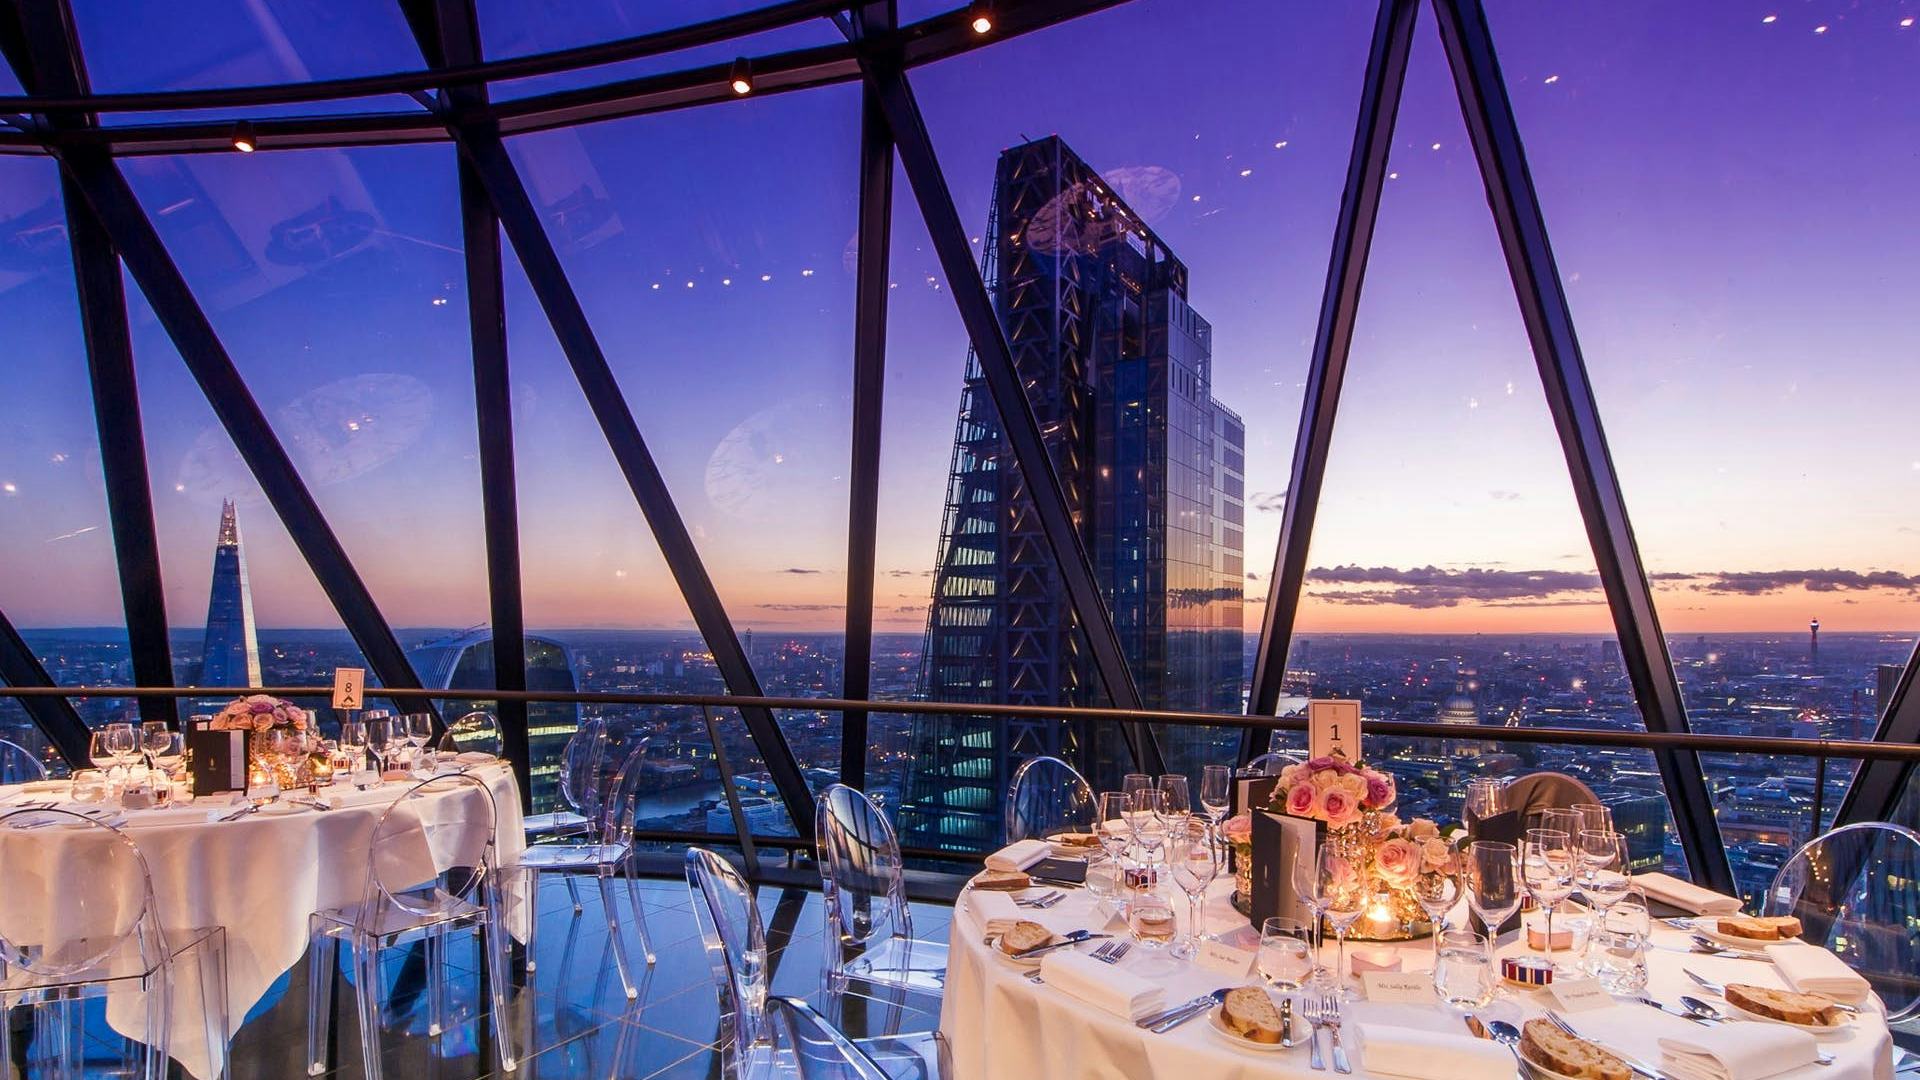 Dining set up at Searcys at The Gherkin